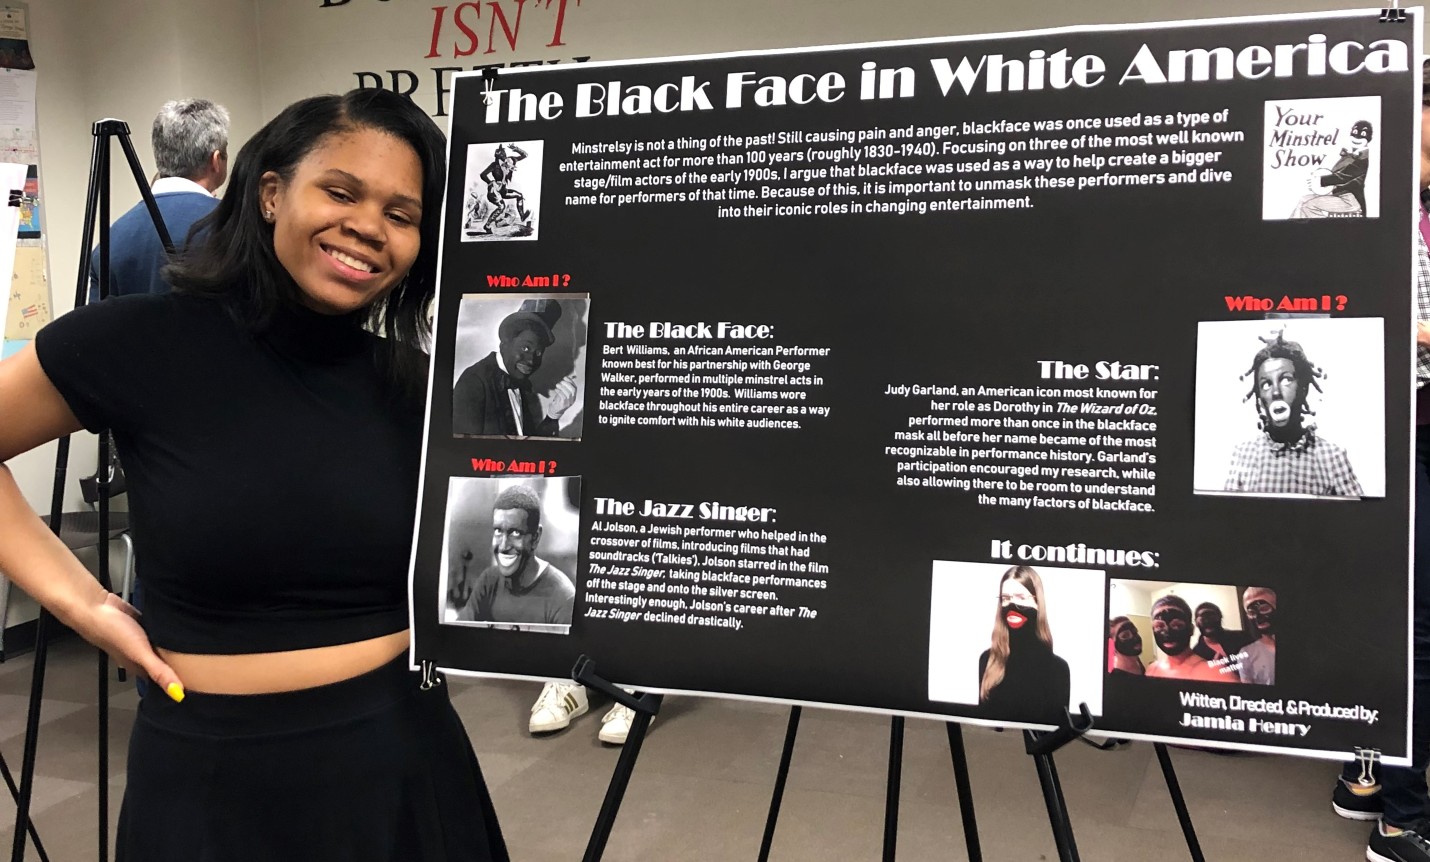 Woman wearing black standing next to a poster board